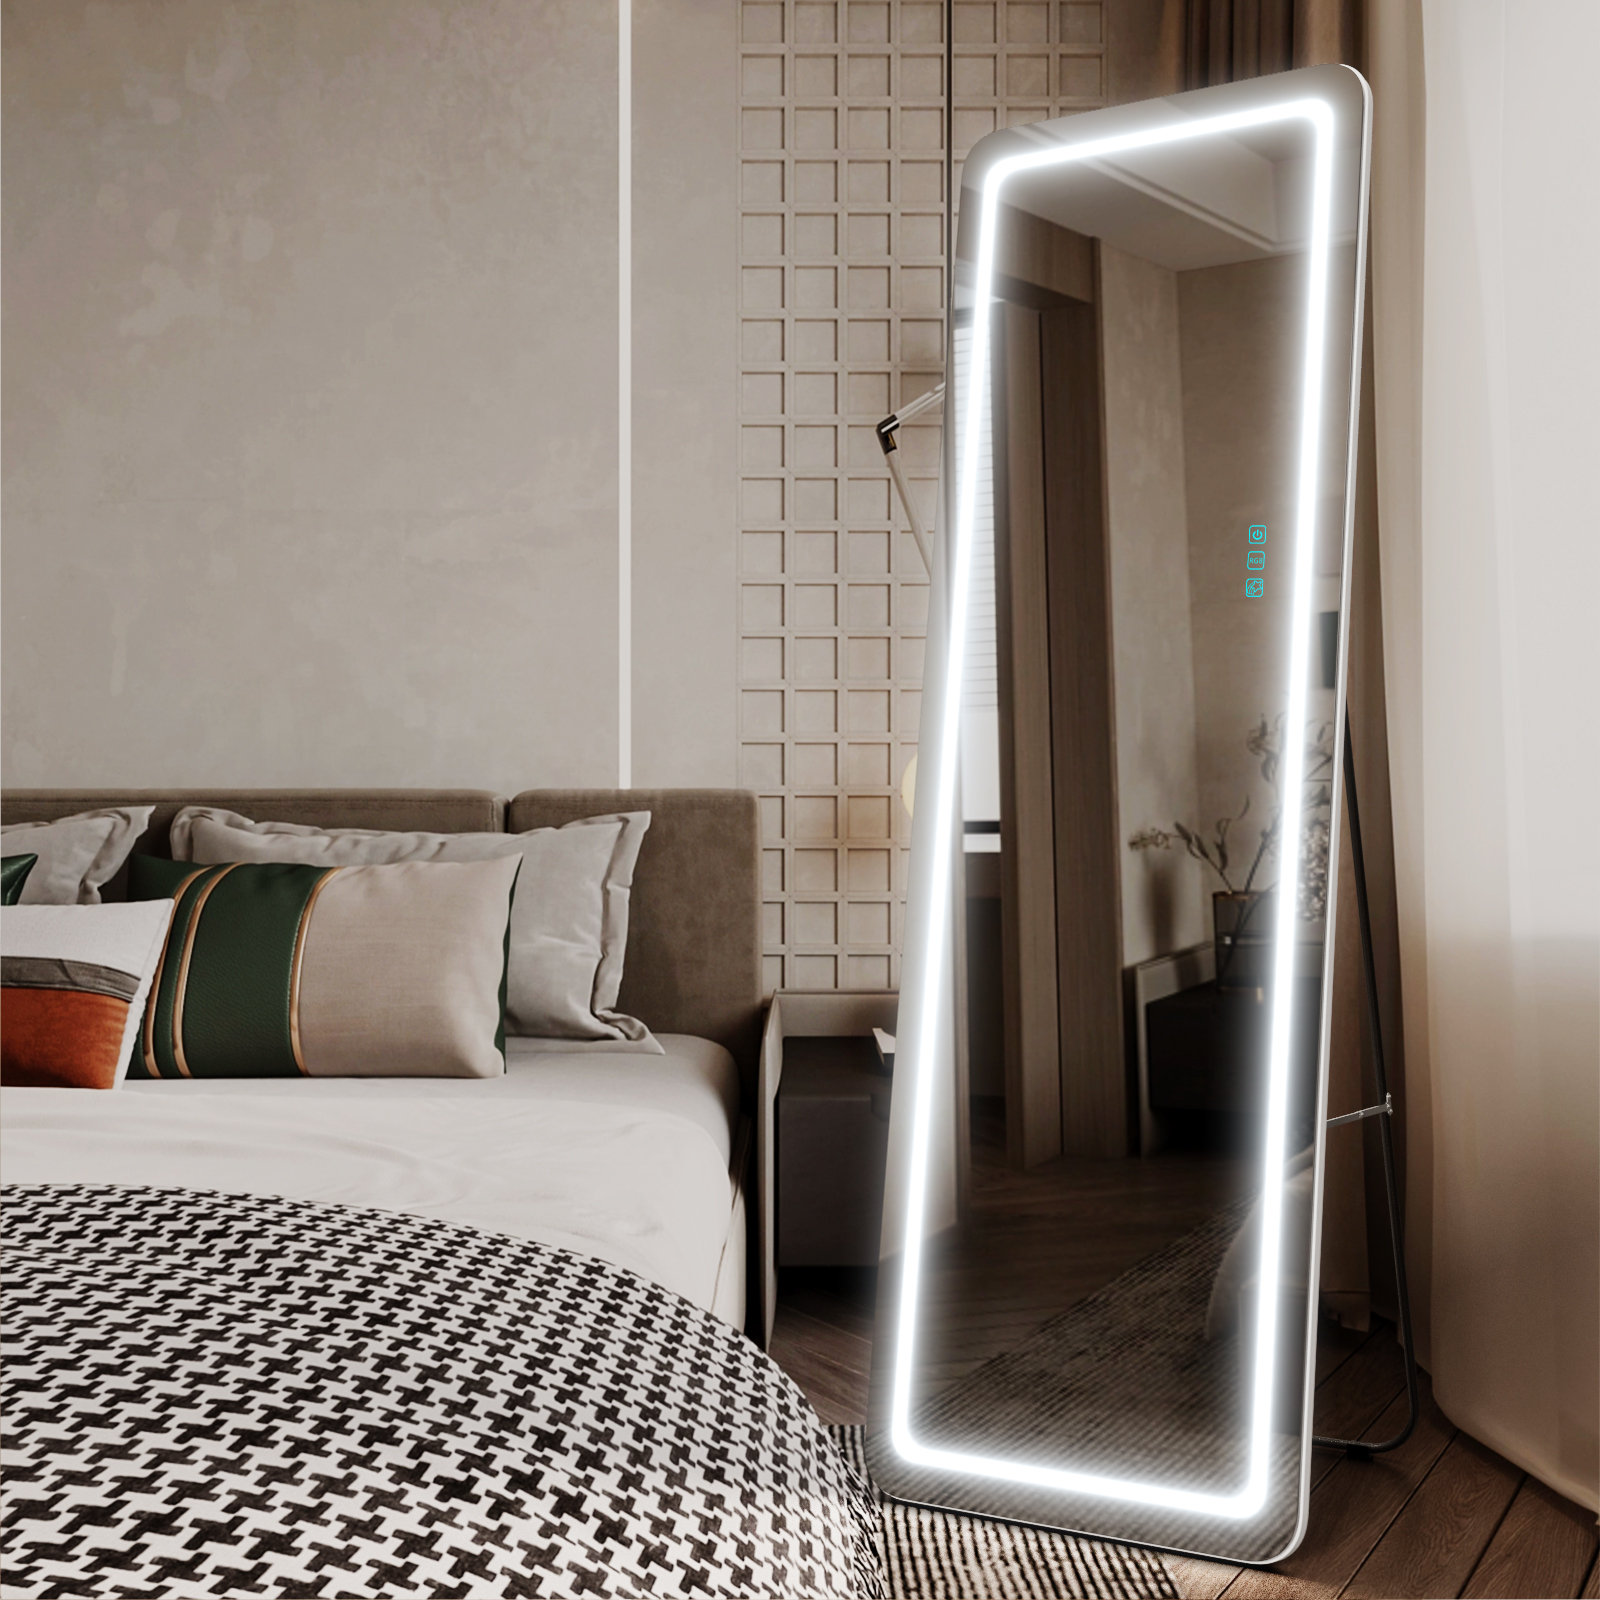 Bedroom mirror ideas: with lights, wood frames or RGB backlight